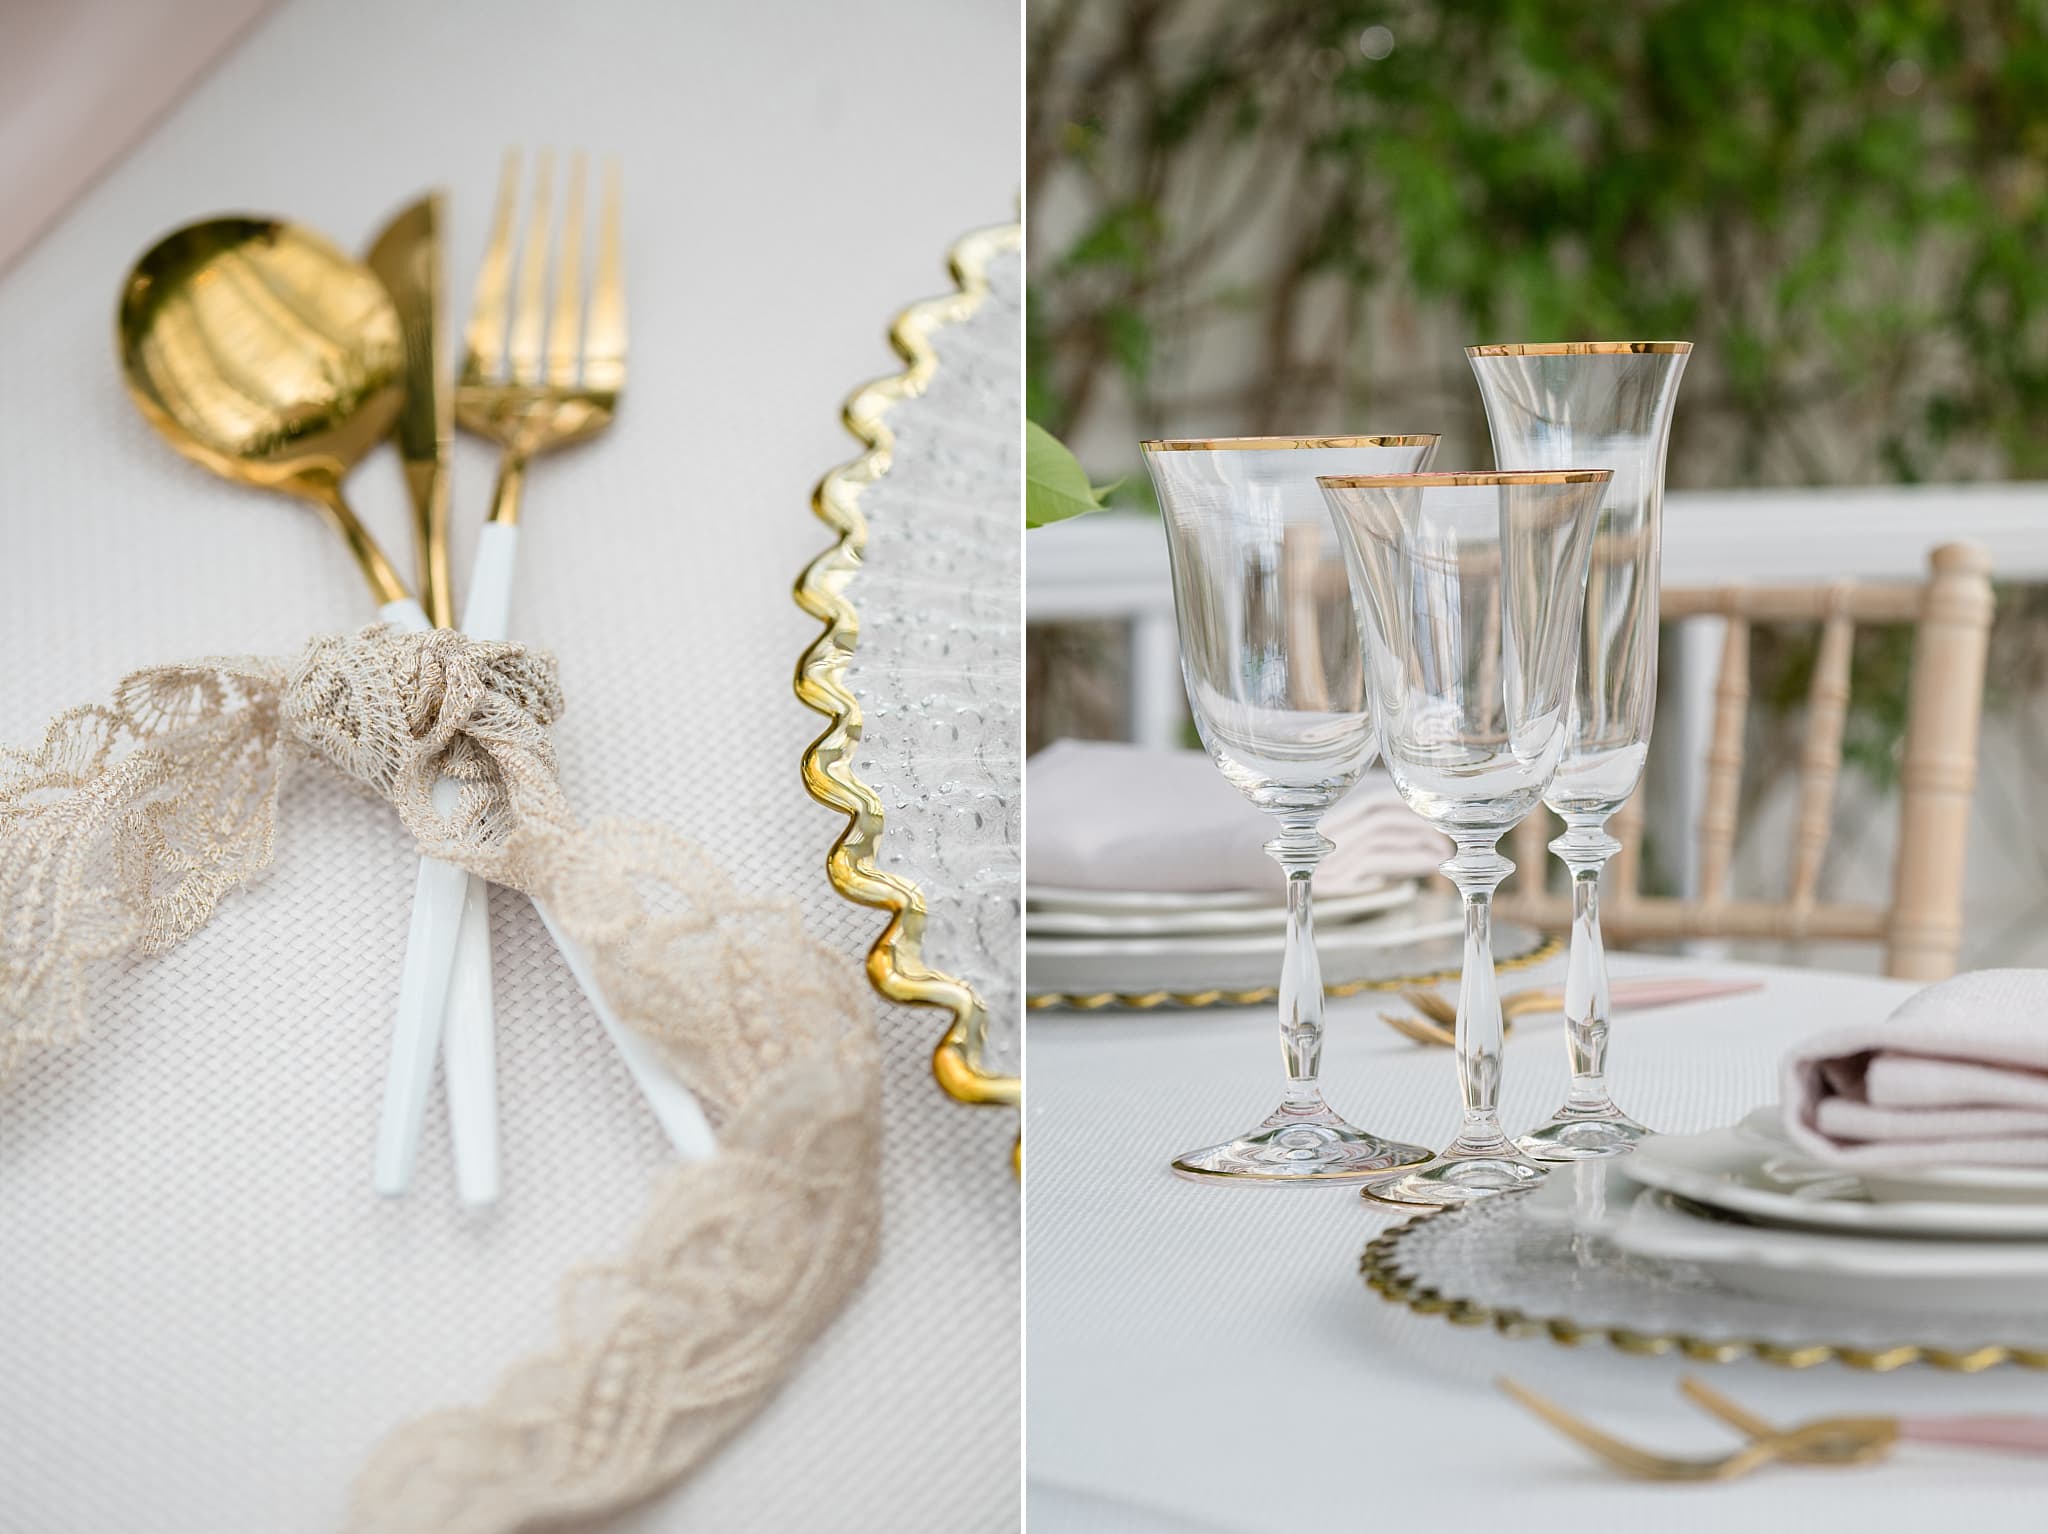 A set of three gold rimmed glasses and gold cutlery with white handles tied with antique coloured lace ribbon